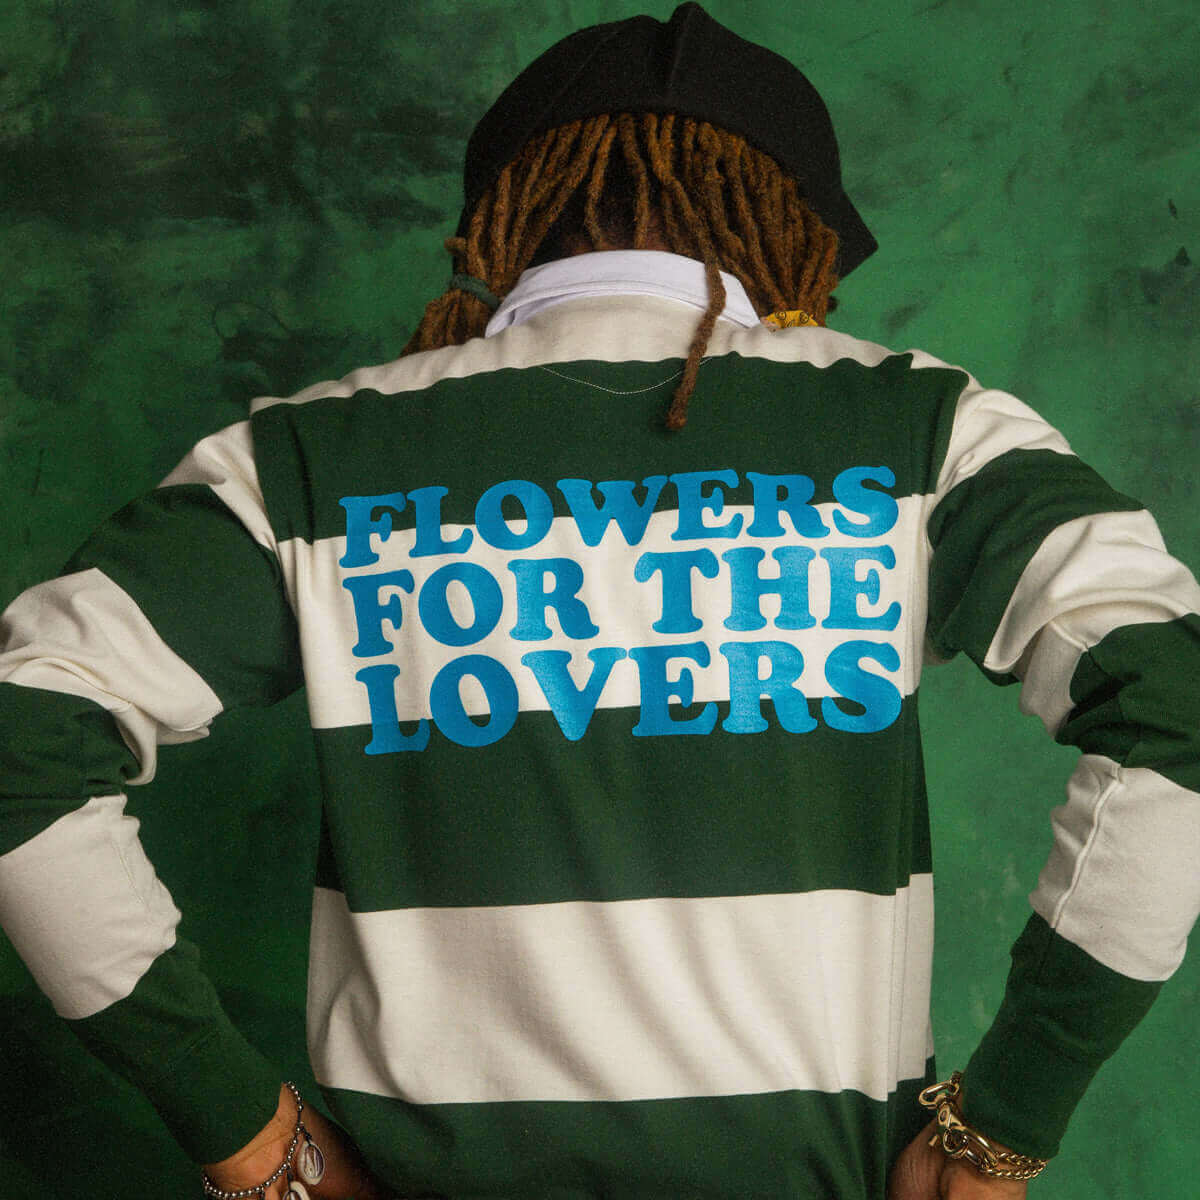 "Flowers For The Lovers" Objects Rugby by Steven Othello